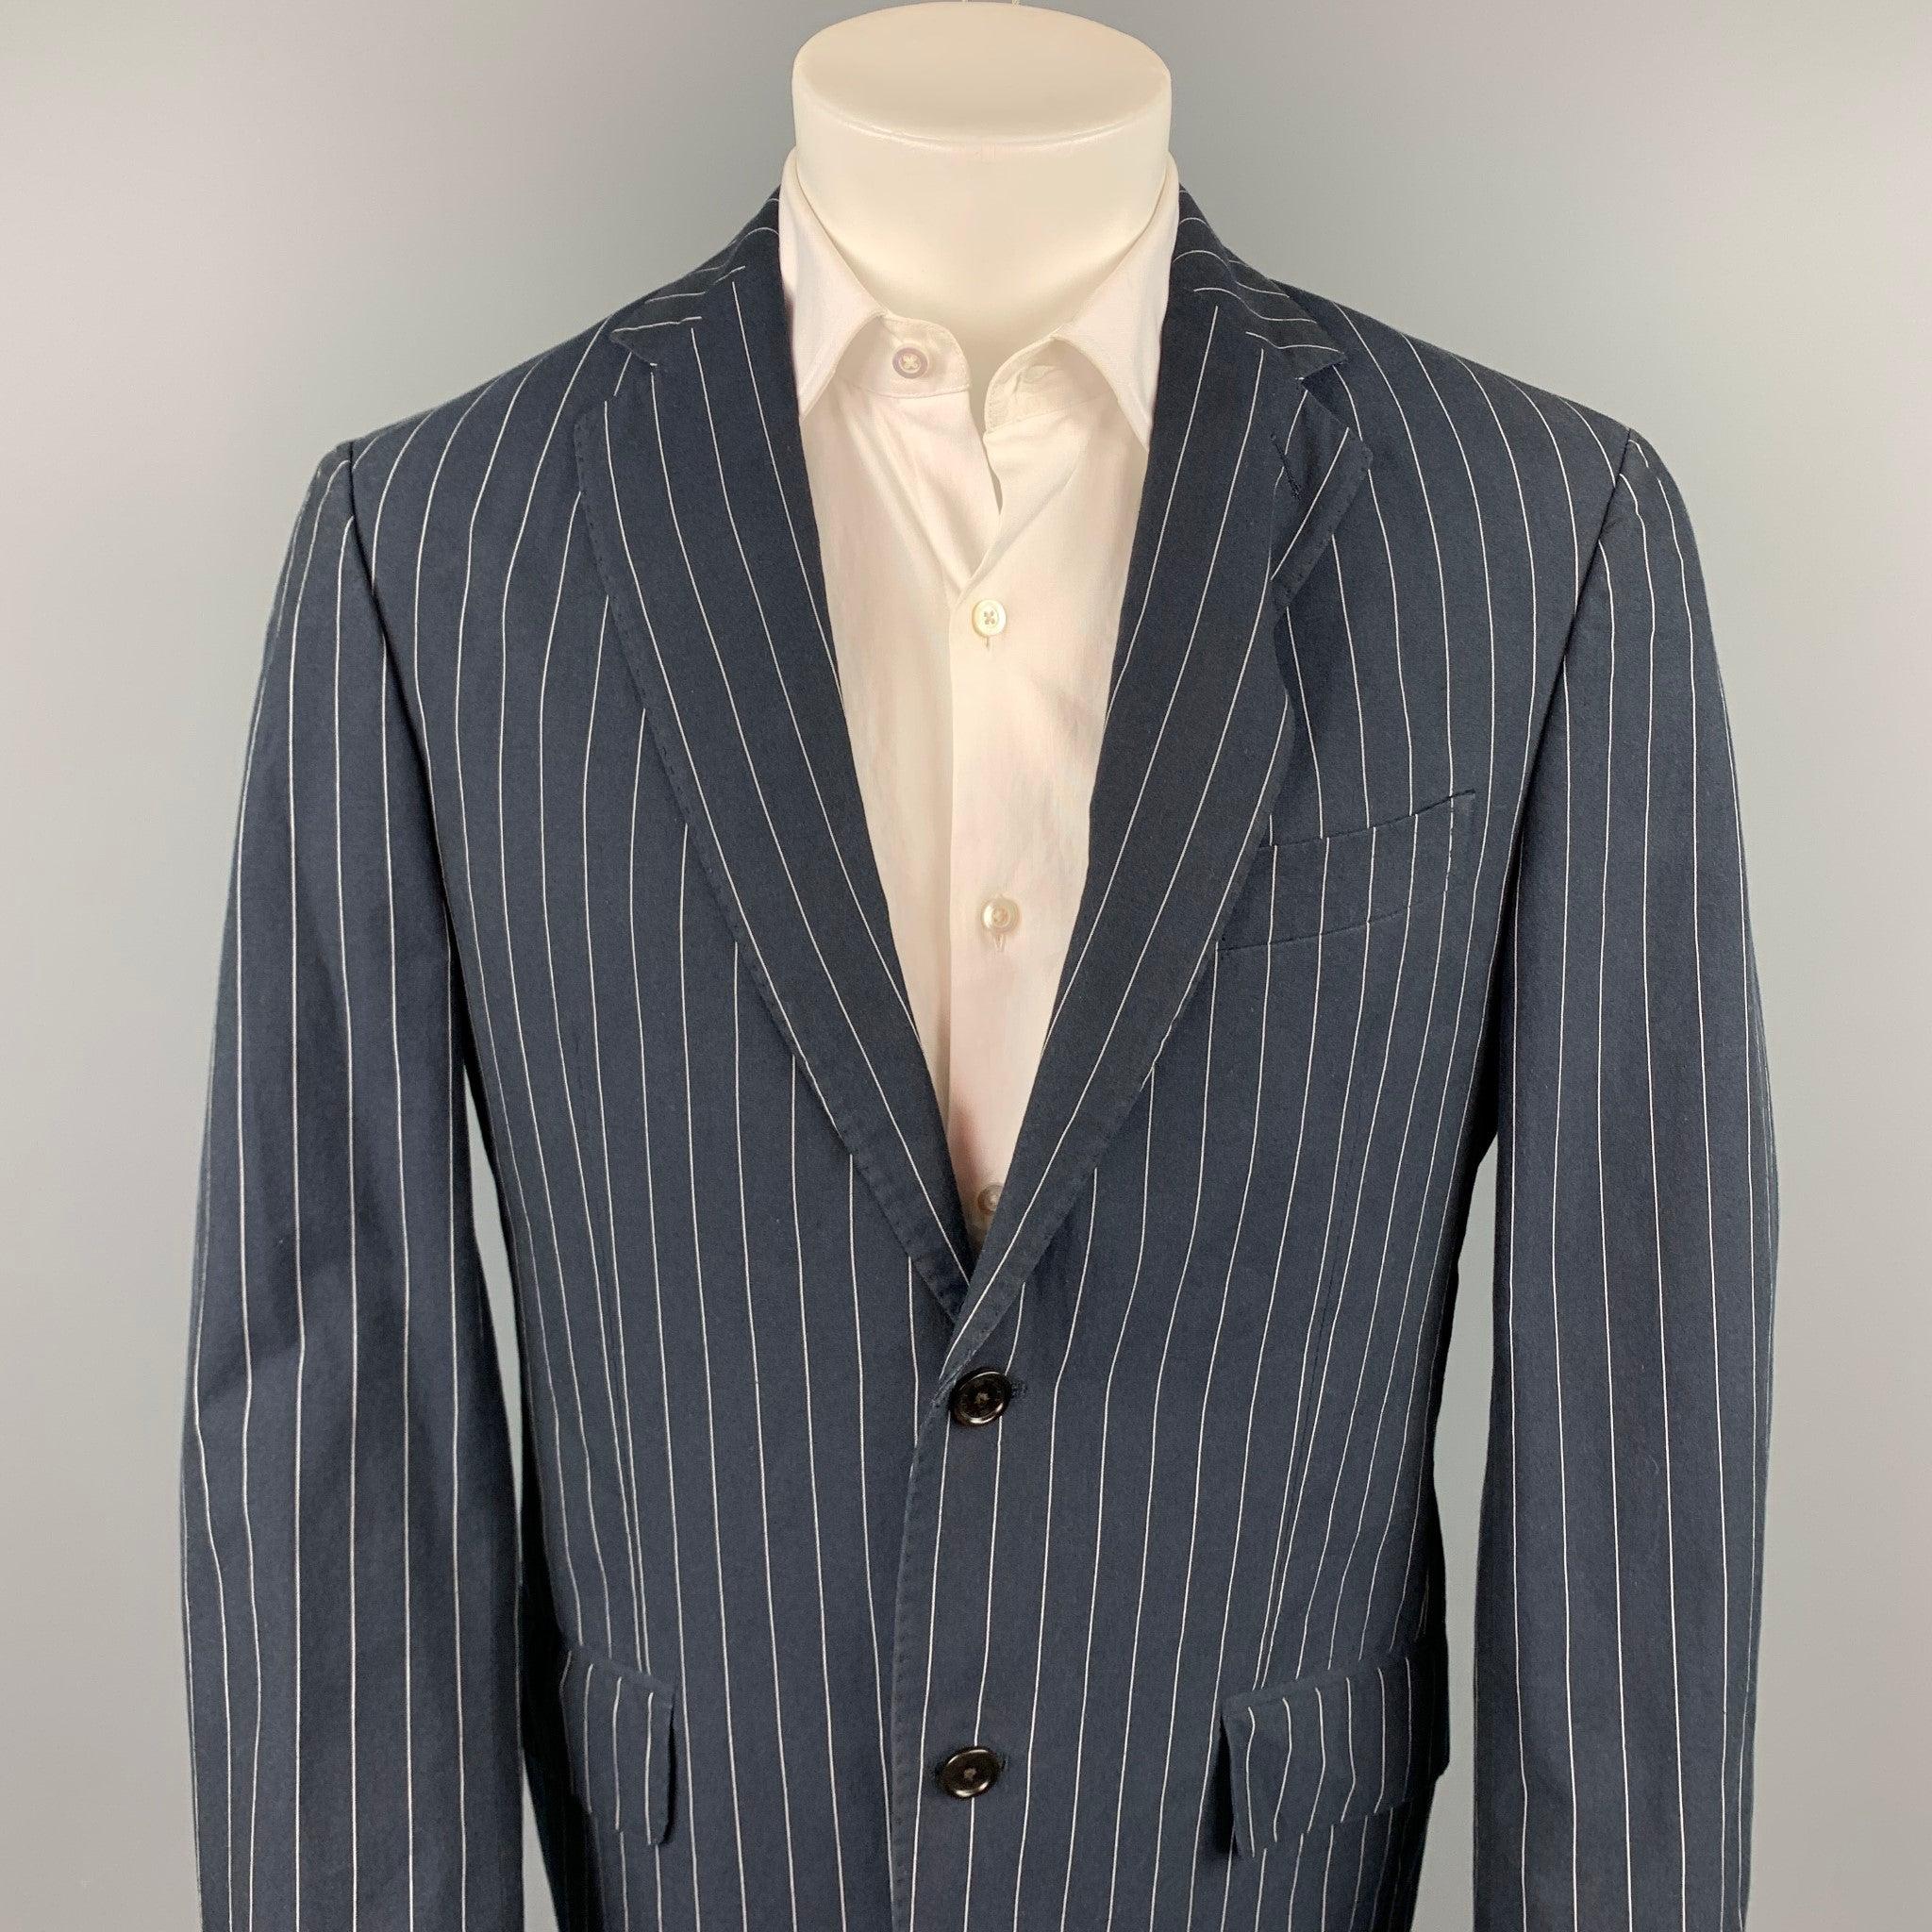 ETRO sport coat comes in a navy pinstripe cotton with a half print liner featuring a notch lapel, flap pockets, and a two button closure. Made in Italy.Very Good
Pre-Owned Condition. 

Marked:   IT 50 

Measurements: 
 
Shoulder:
18.5 inches  Chest: